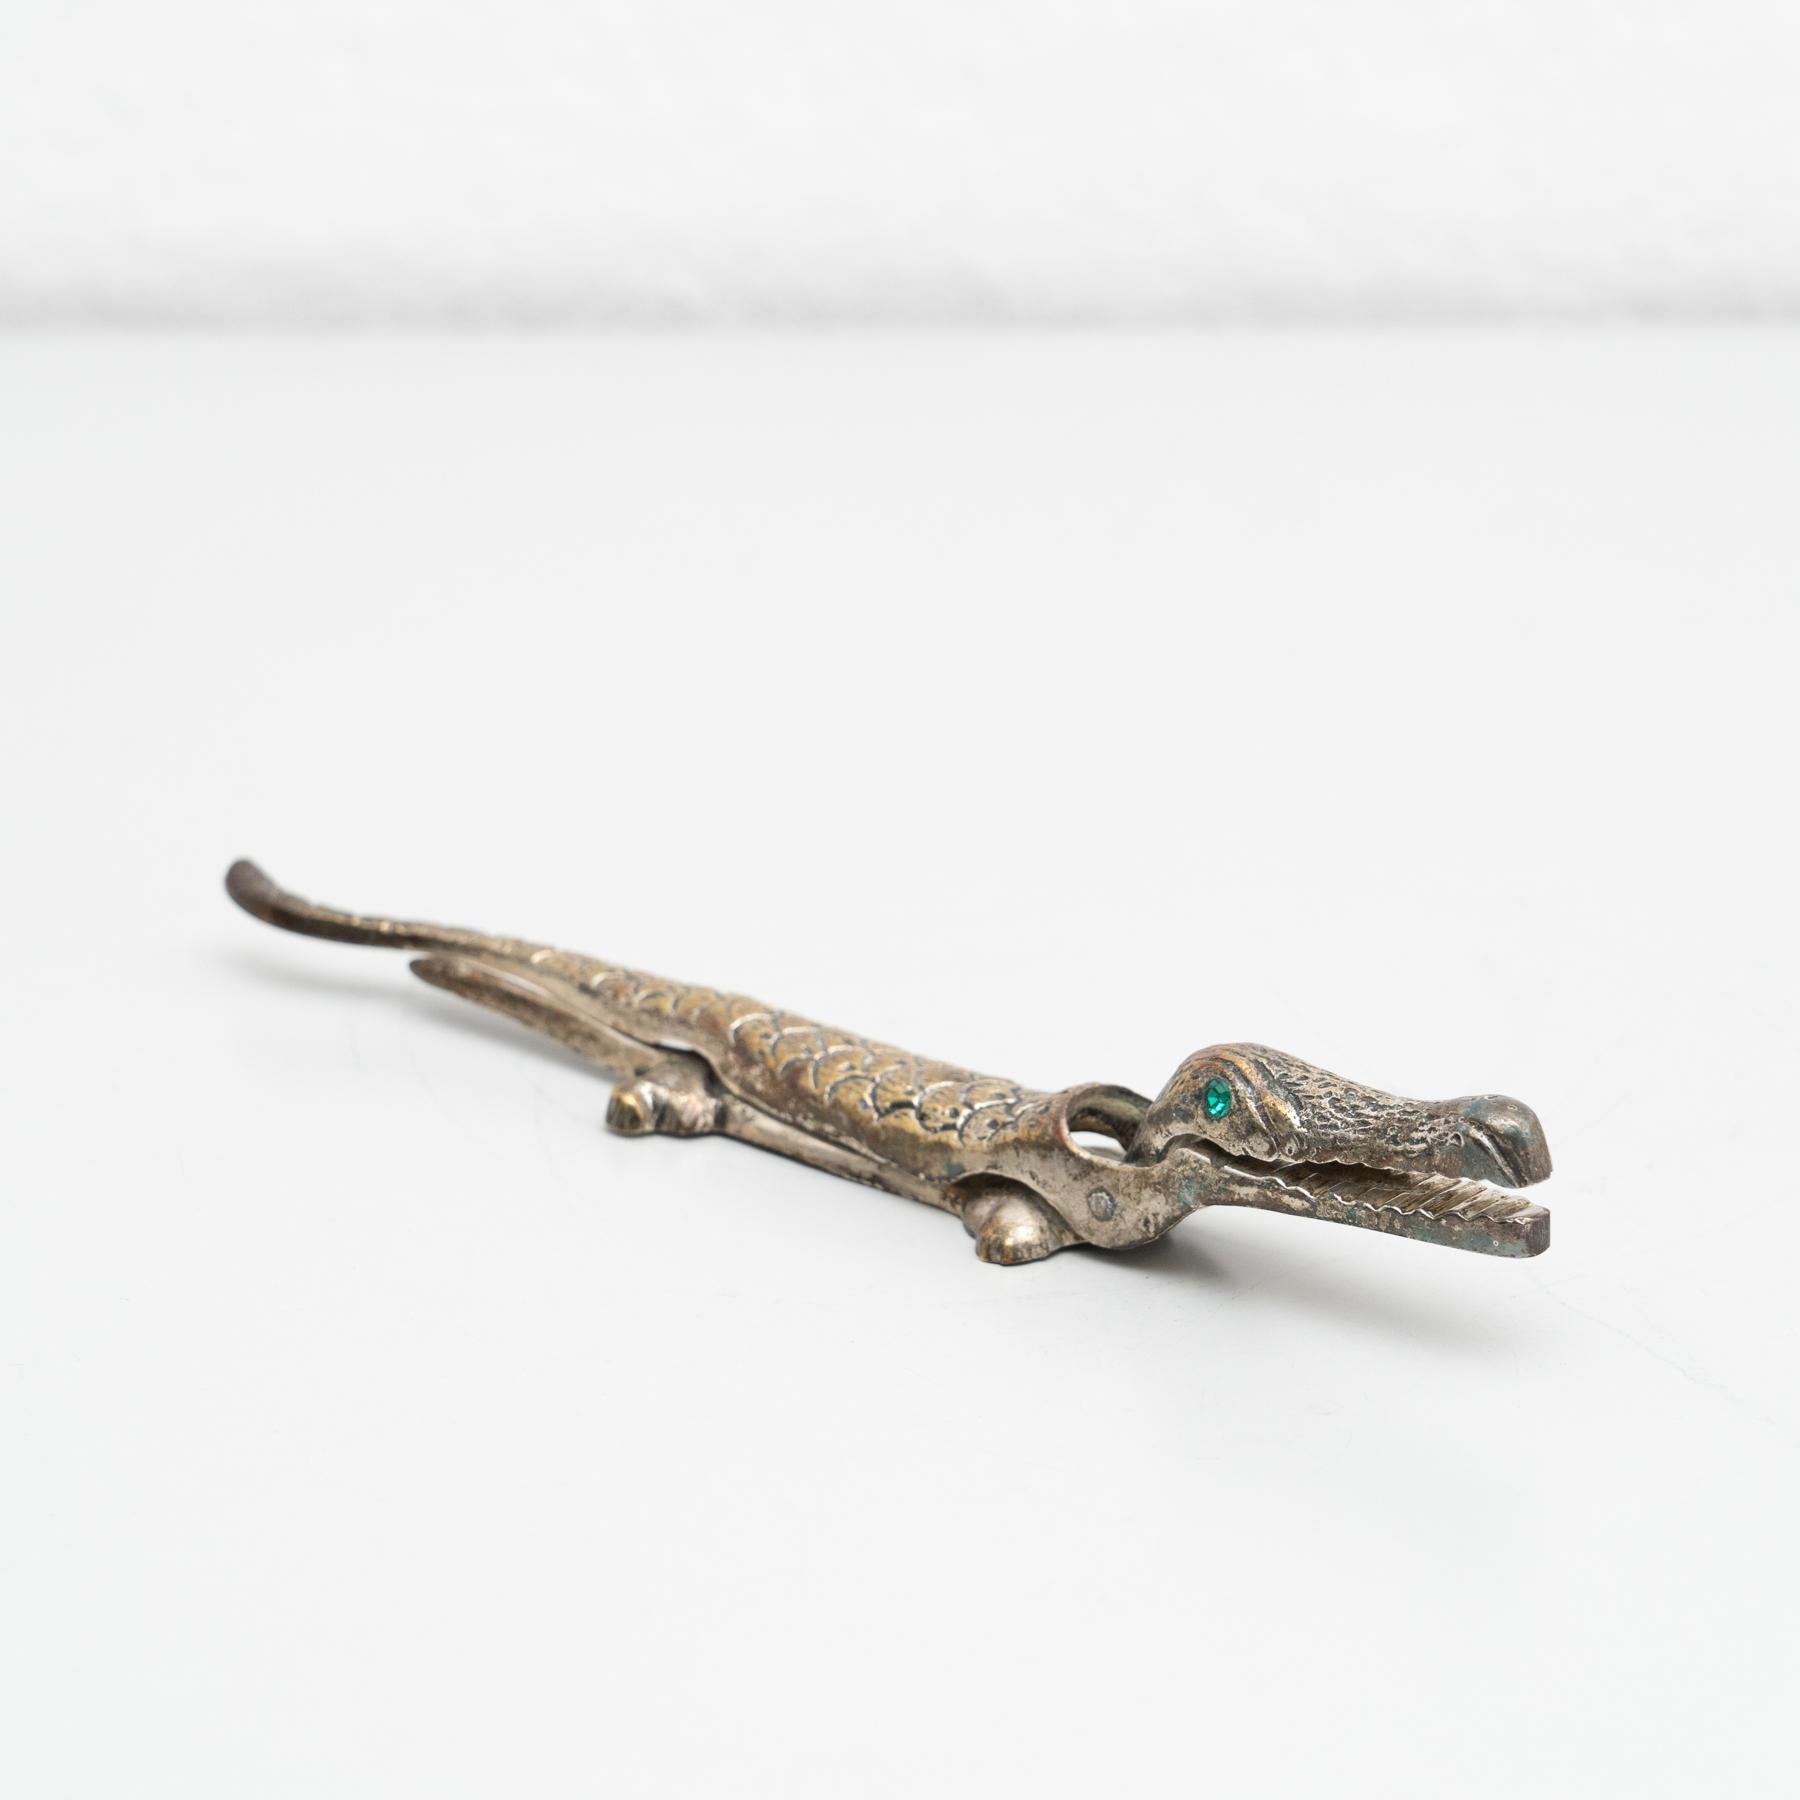 Antique vintage traditional nutcracker. In a crocodile shape.

Made by unknown manufacturer in France, circa 1960.

In original condition, wear consistent with age and use, preserving a beautiful patina.

Materials:
Metal.
 